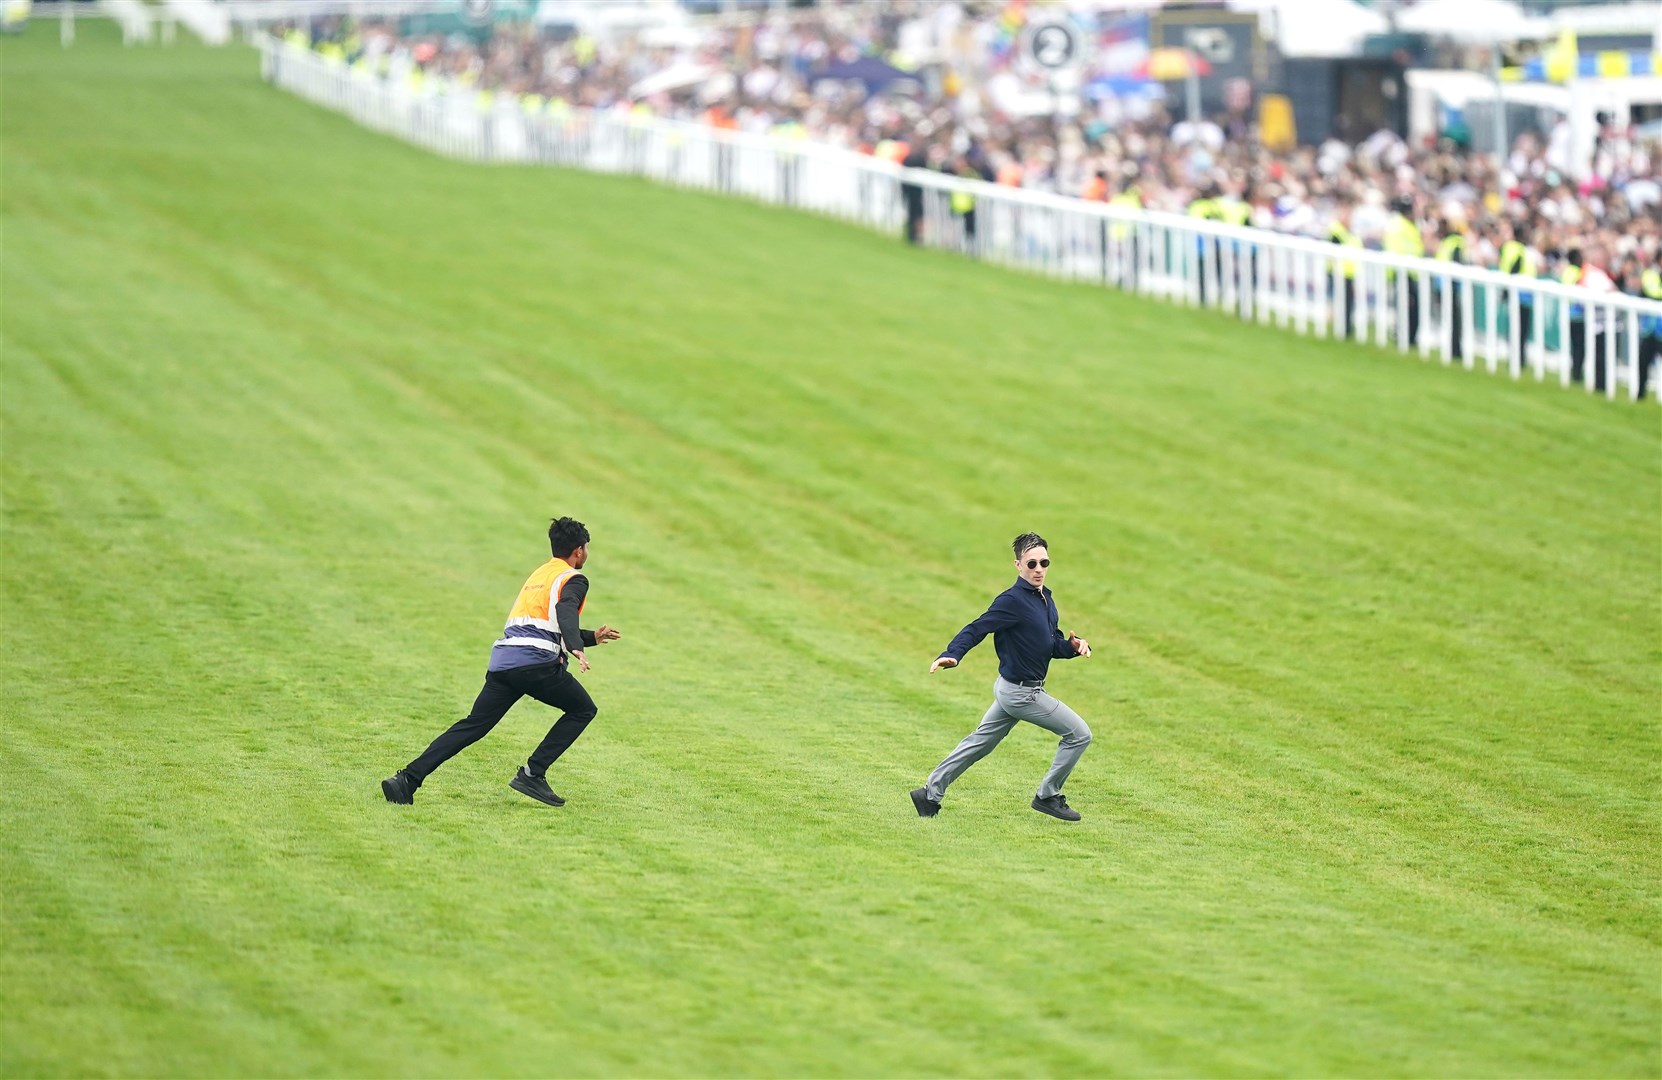 The incident happened on June 3 as the Epsom Derby started (Mike Egerton/PA)